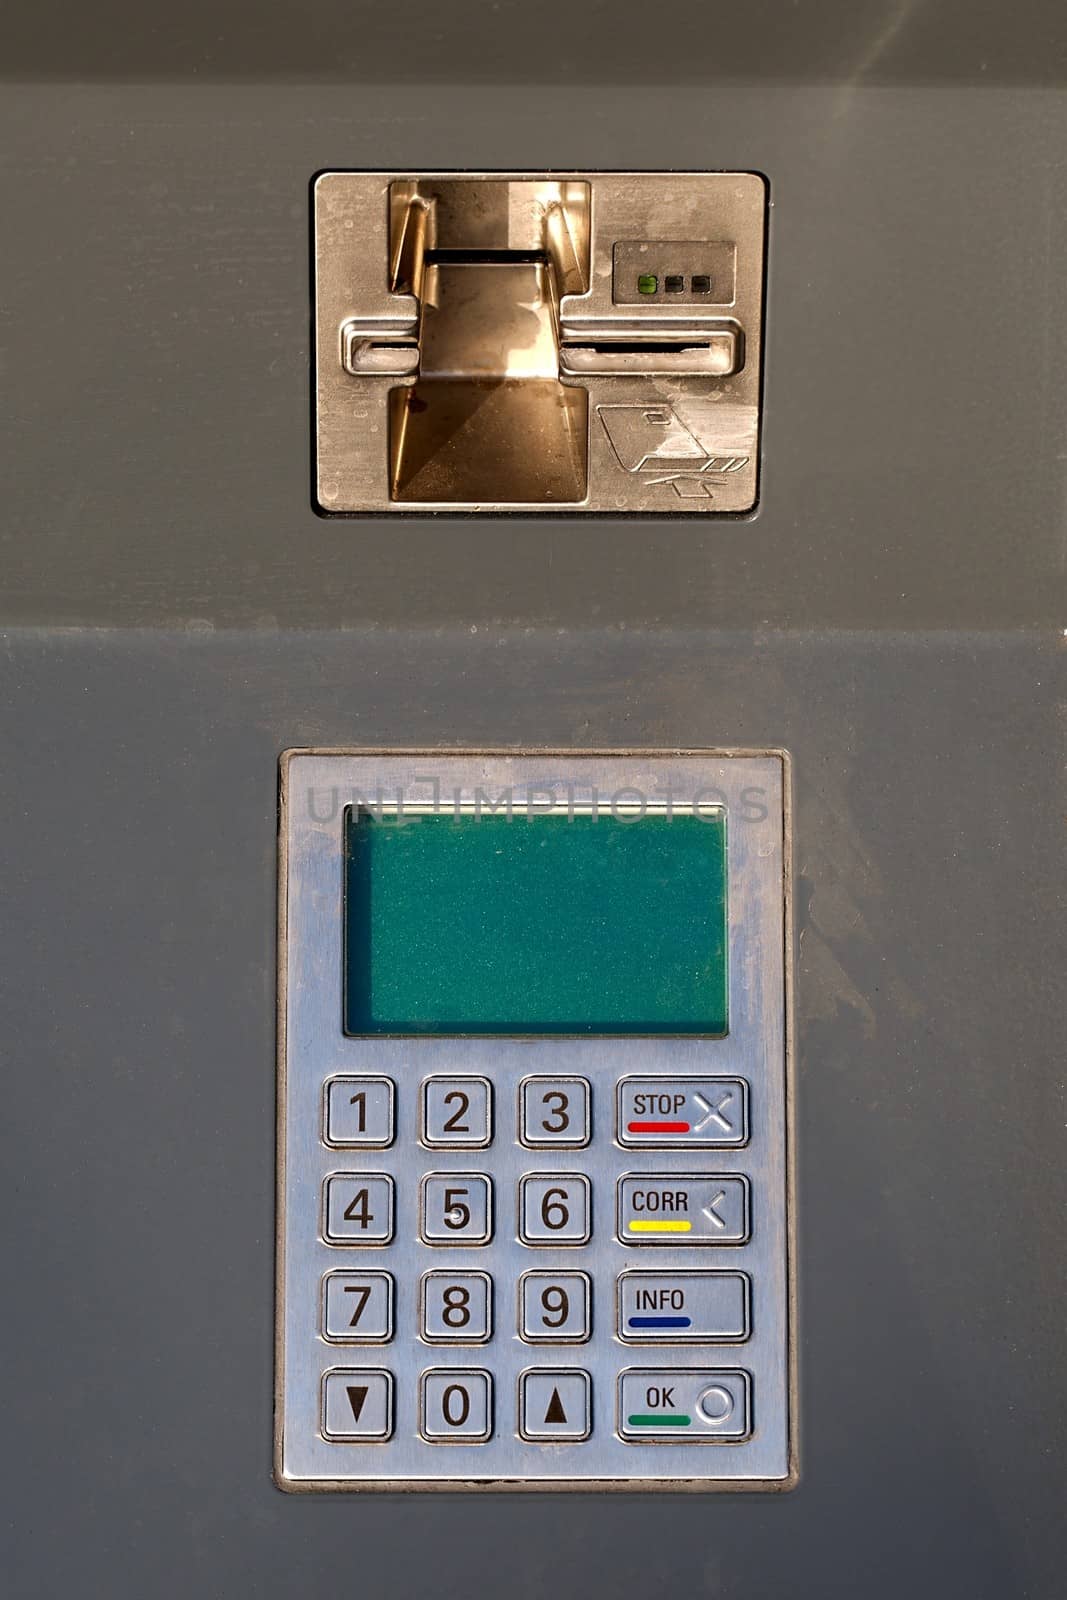 Password screen of a cash machine or point of sale termina